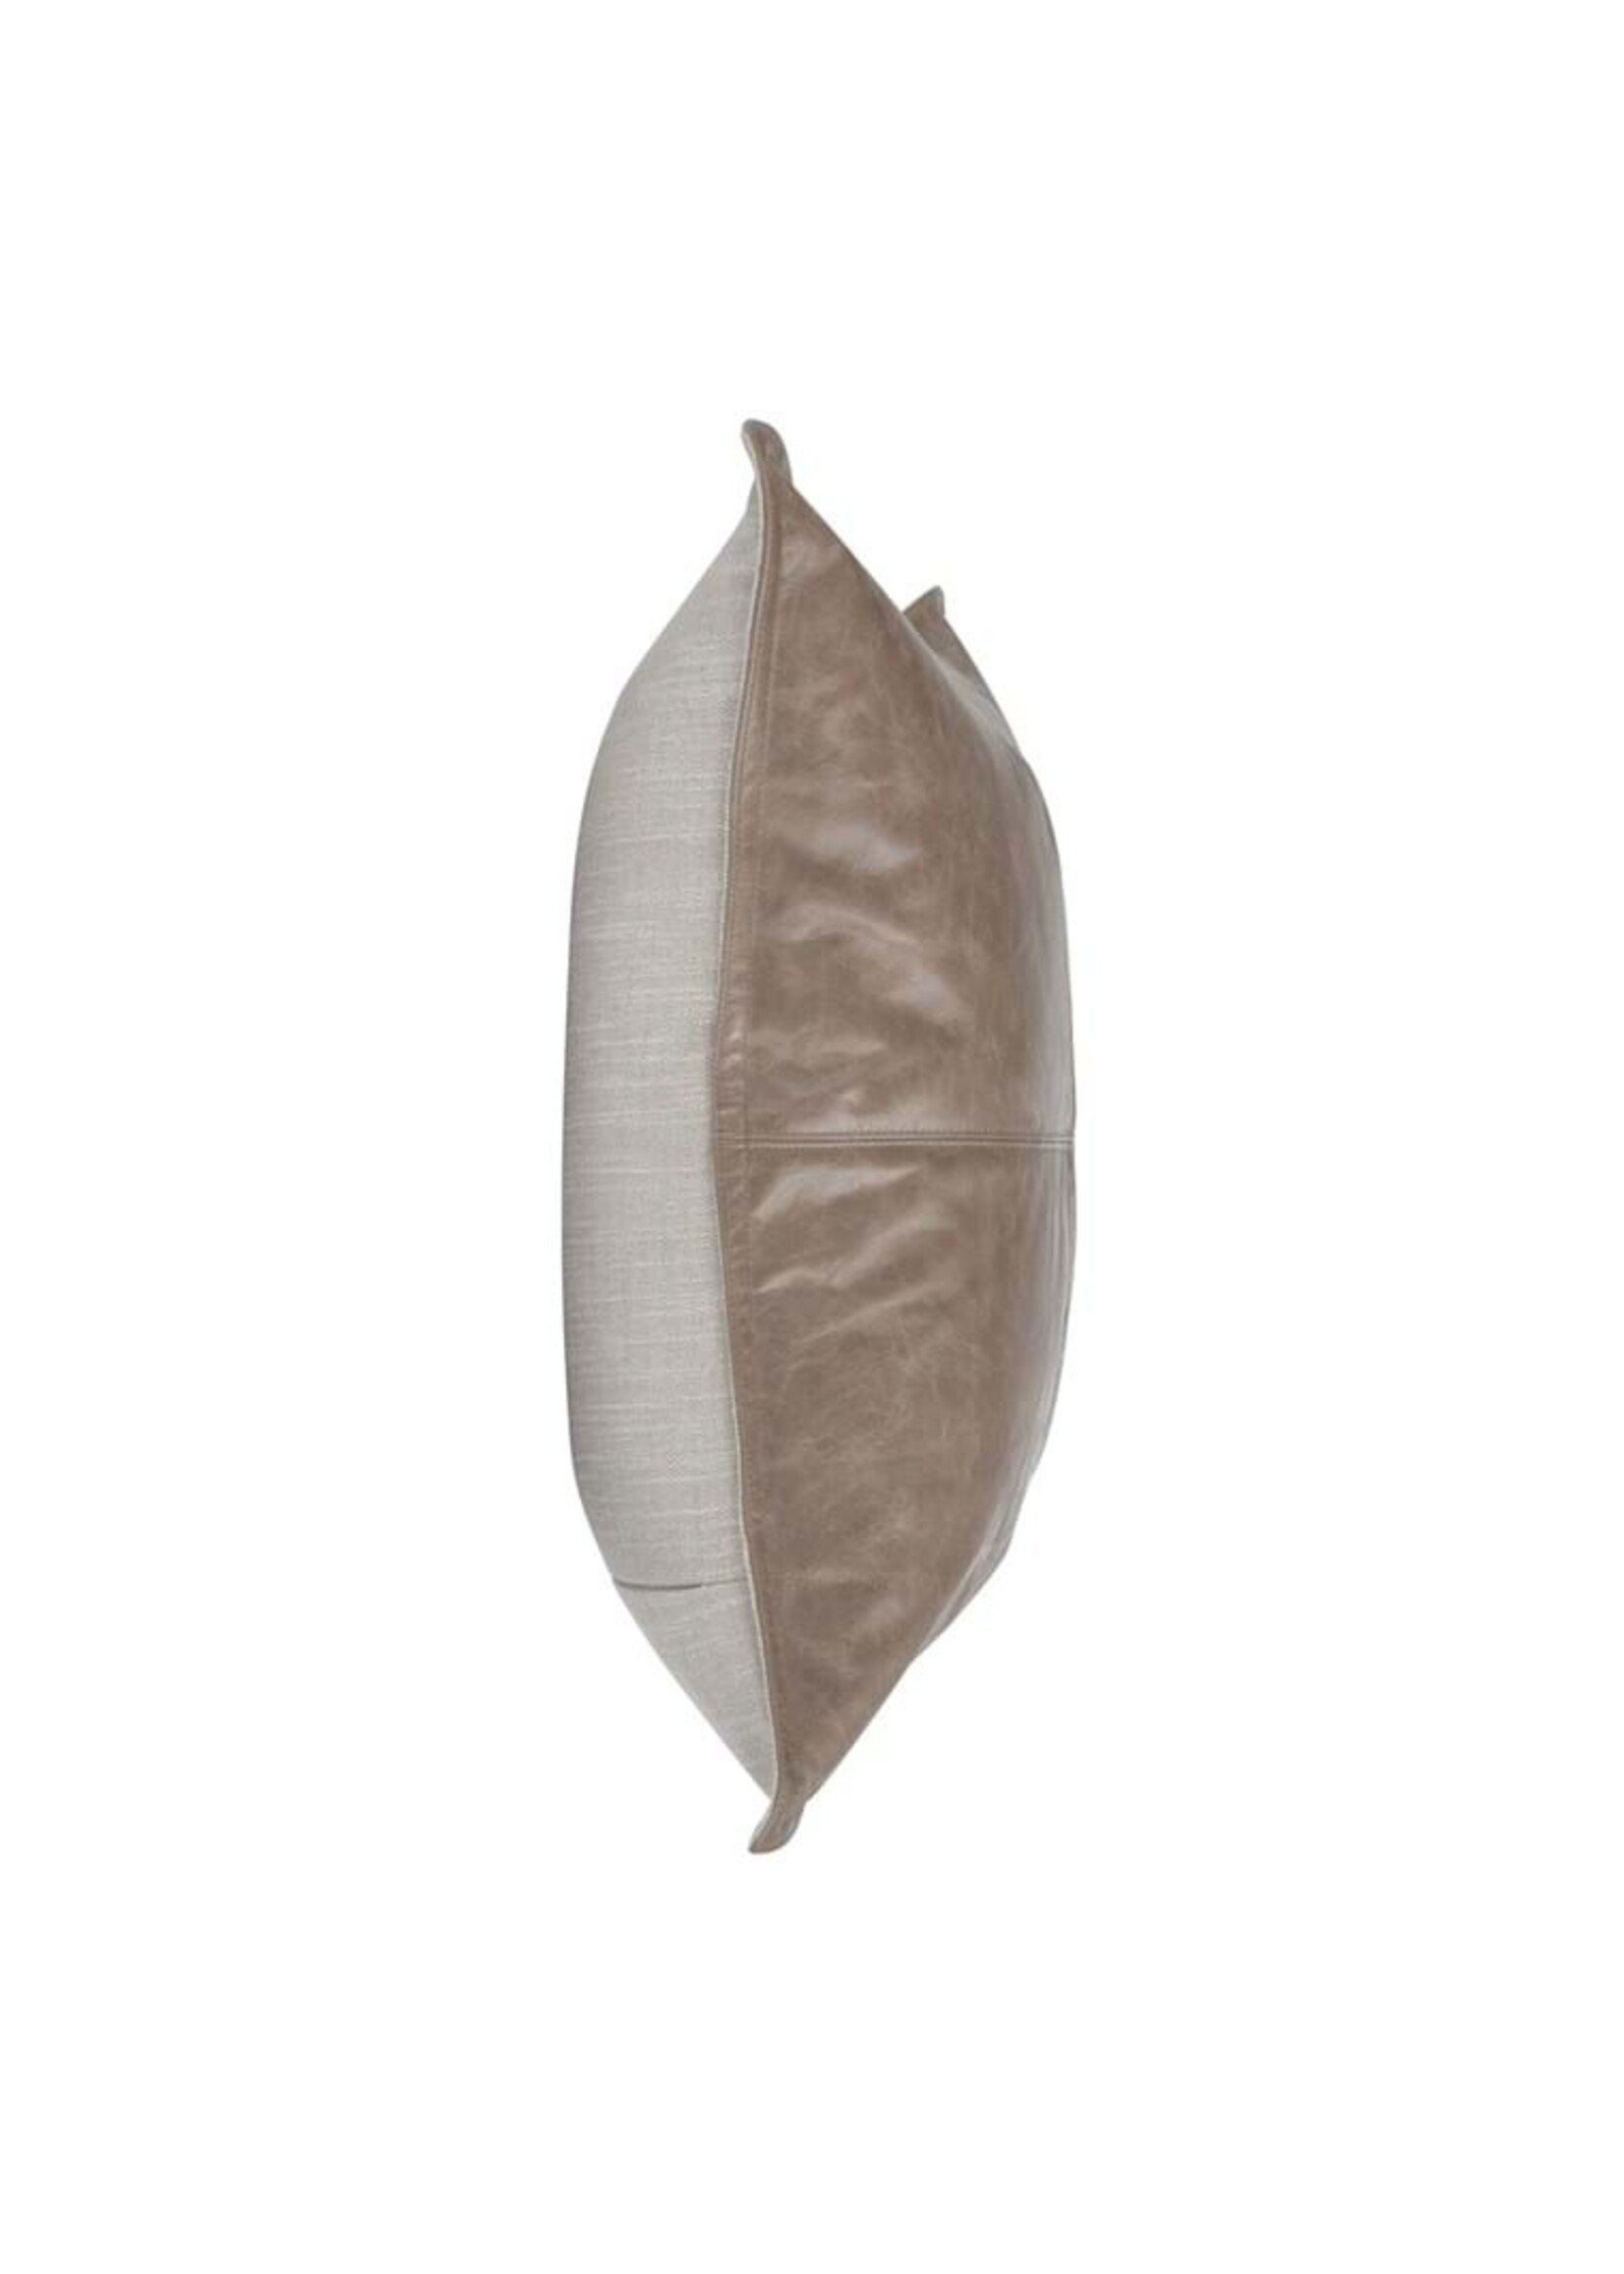 SLD Leather Sandstorm Pillow-Taupe